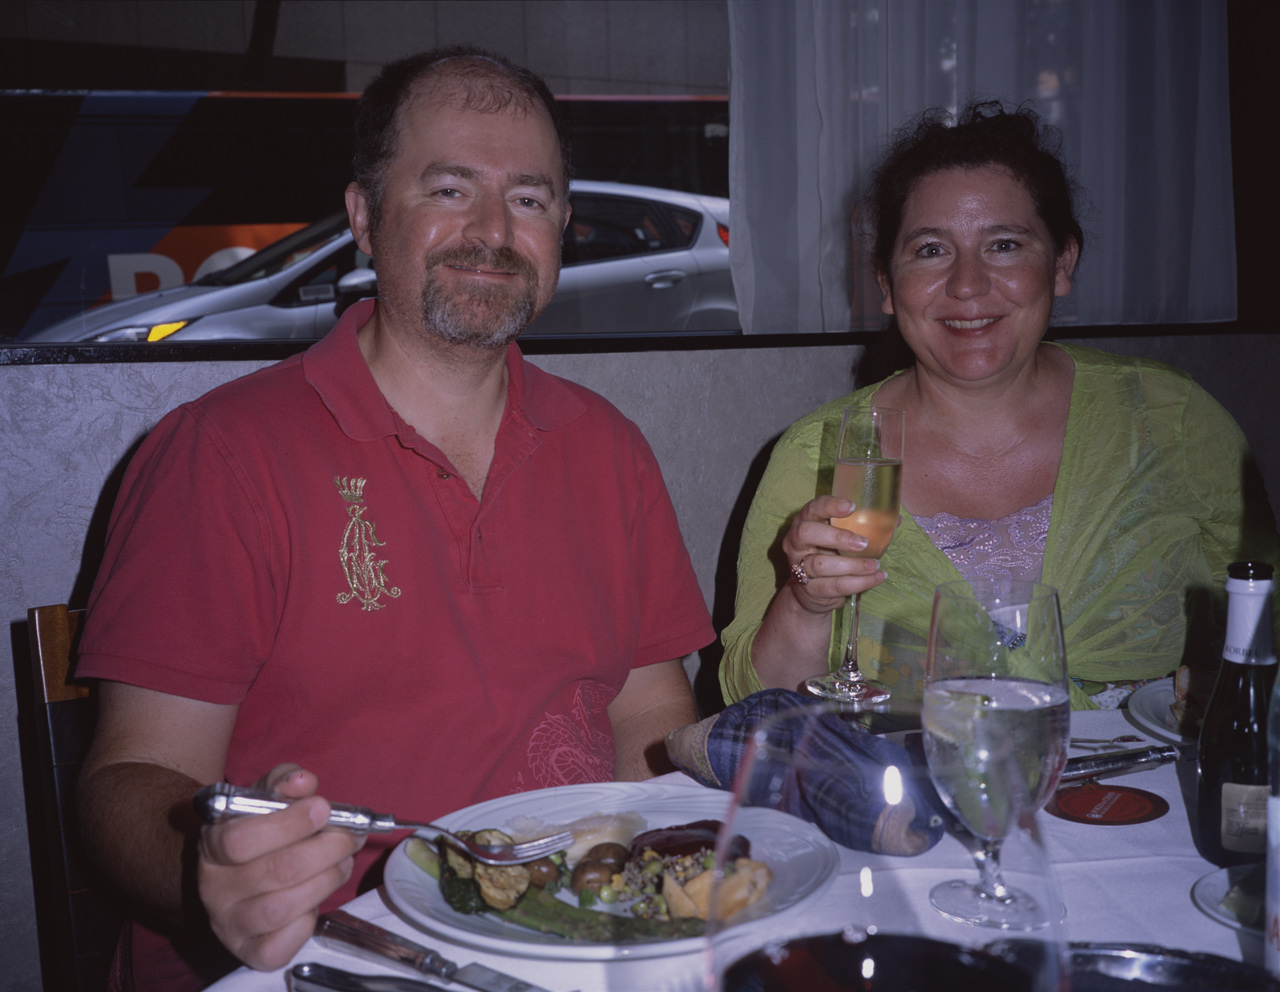 Steve and Jackie enjoying a fantastic Birthday lunch at the Brazilian restaurant FOGO DE CHAO